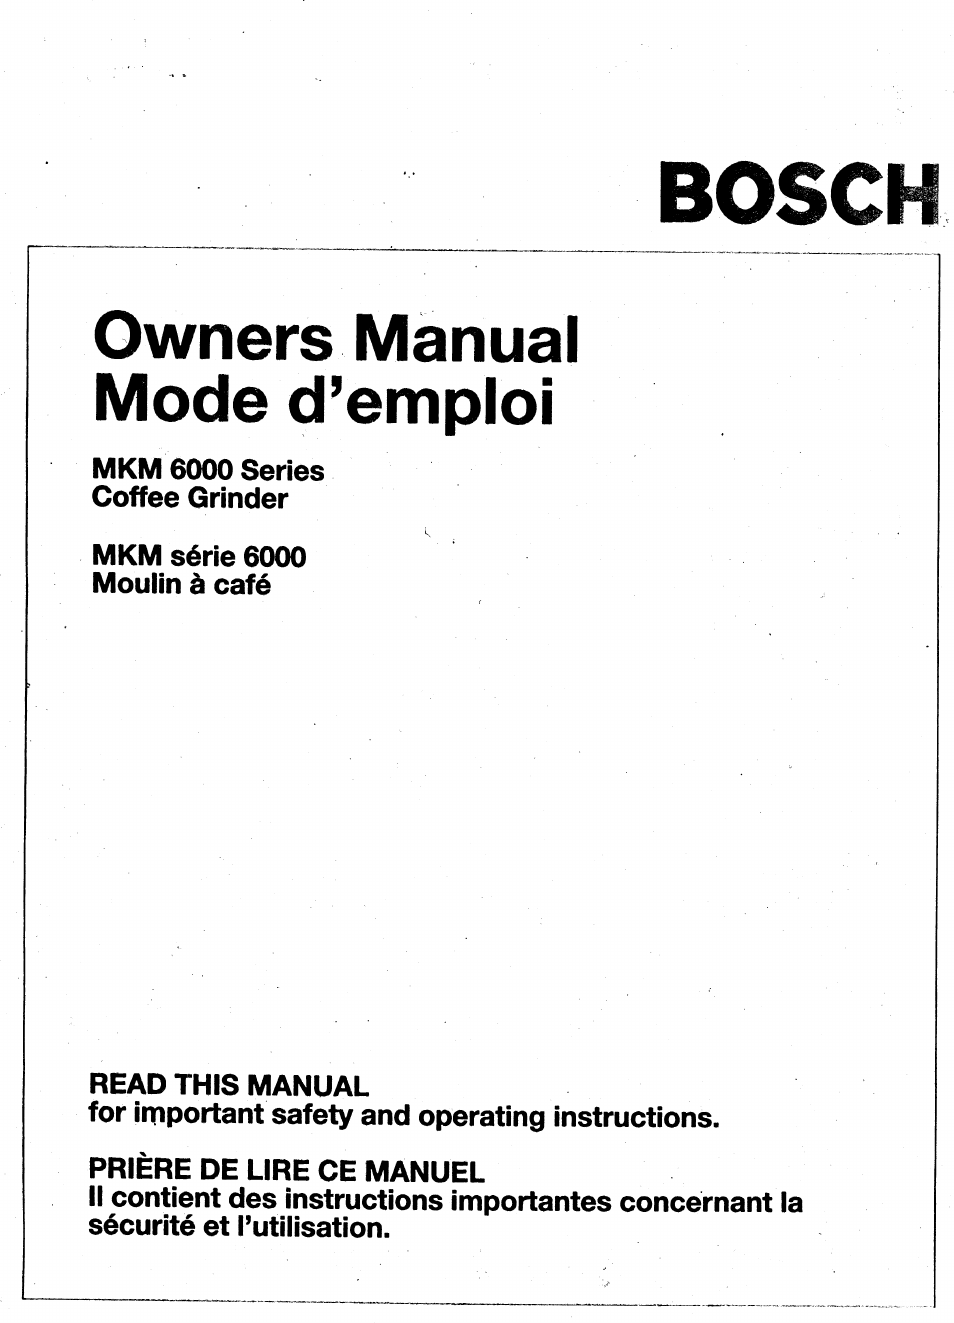 Bosch MKM 6000 User Manual | 6 pages